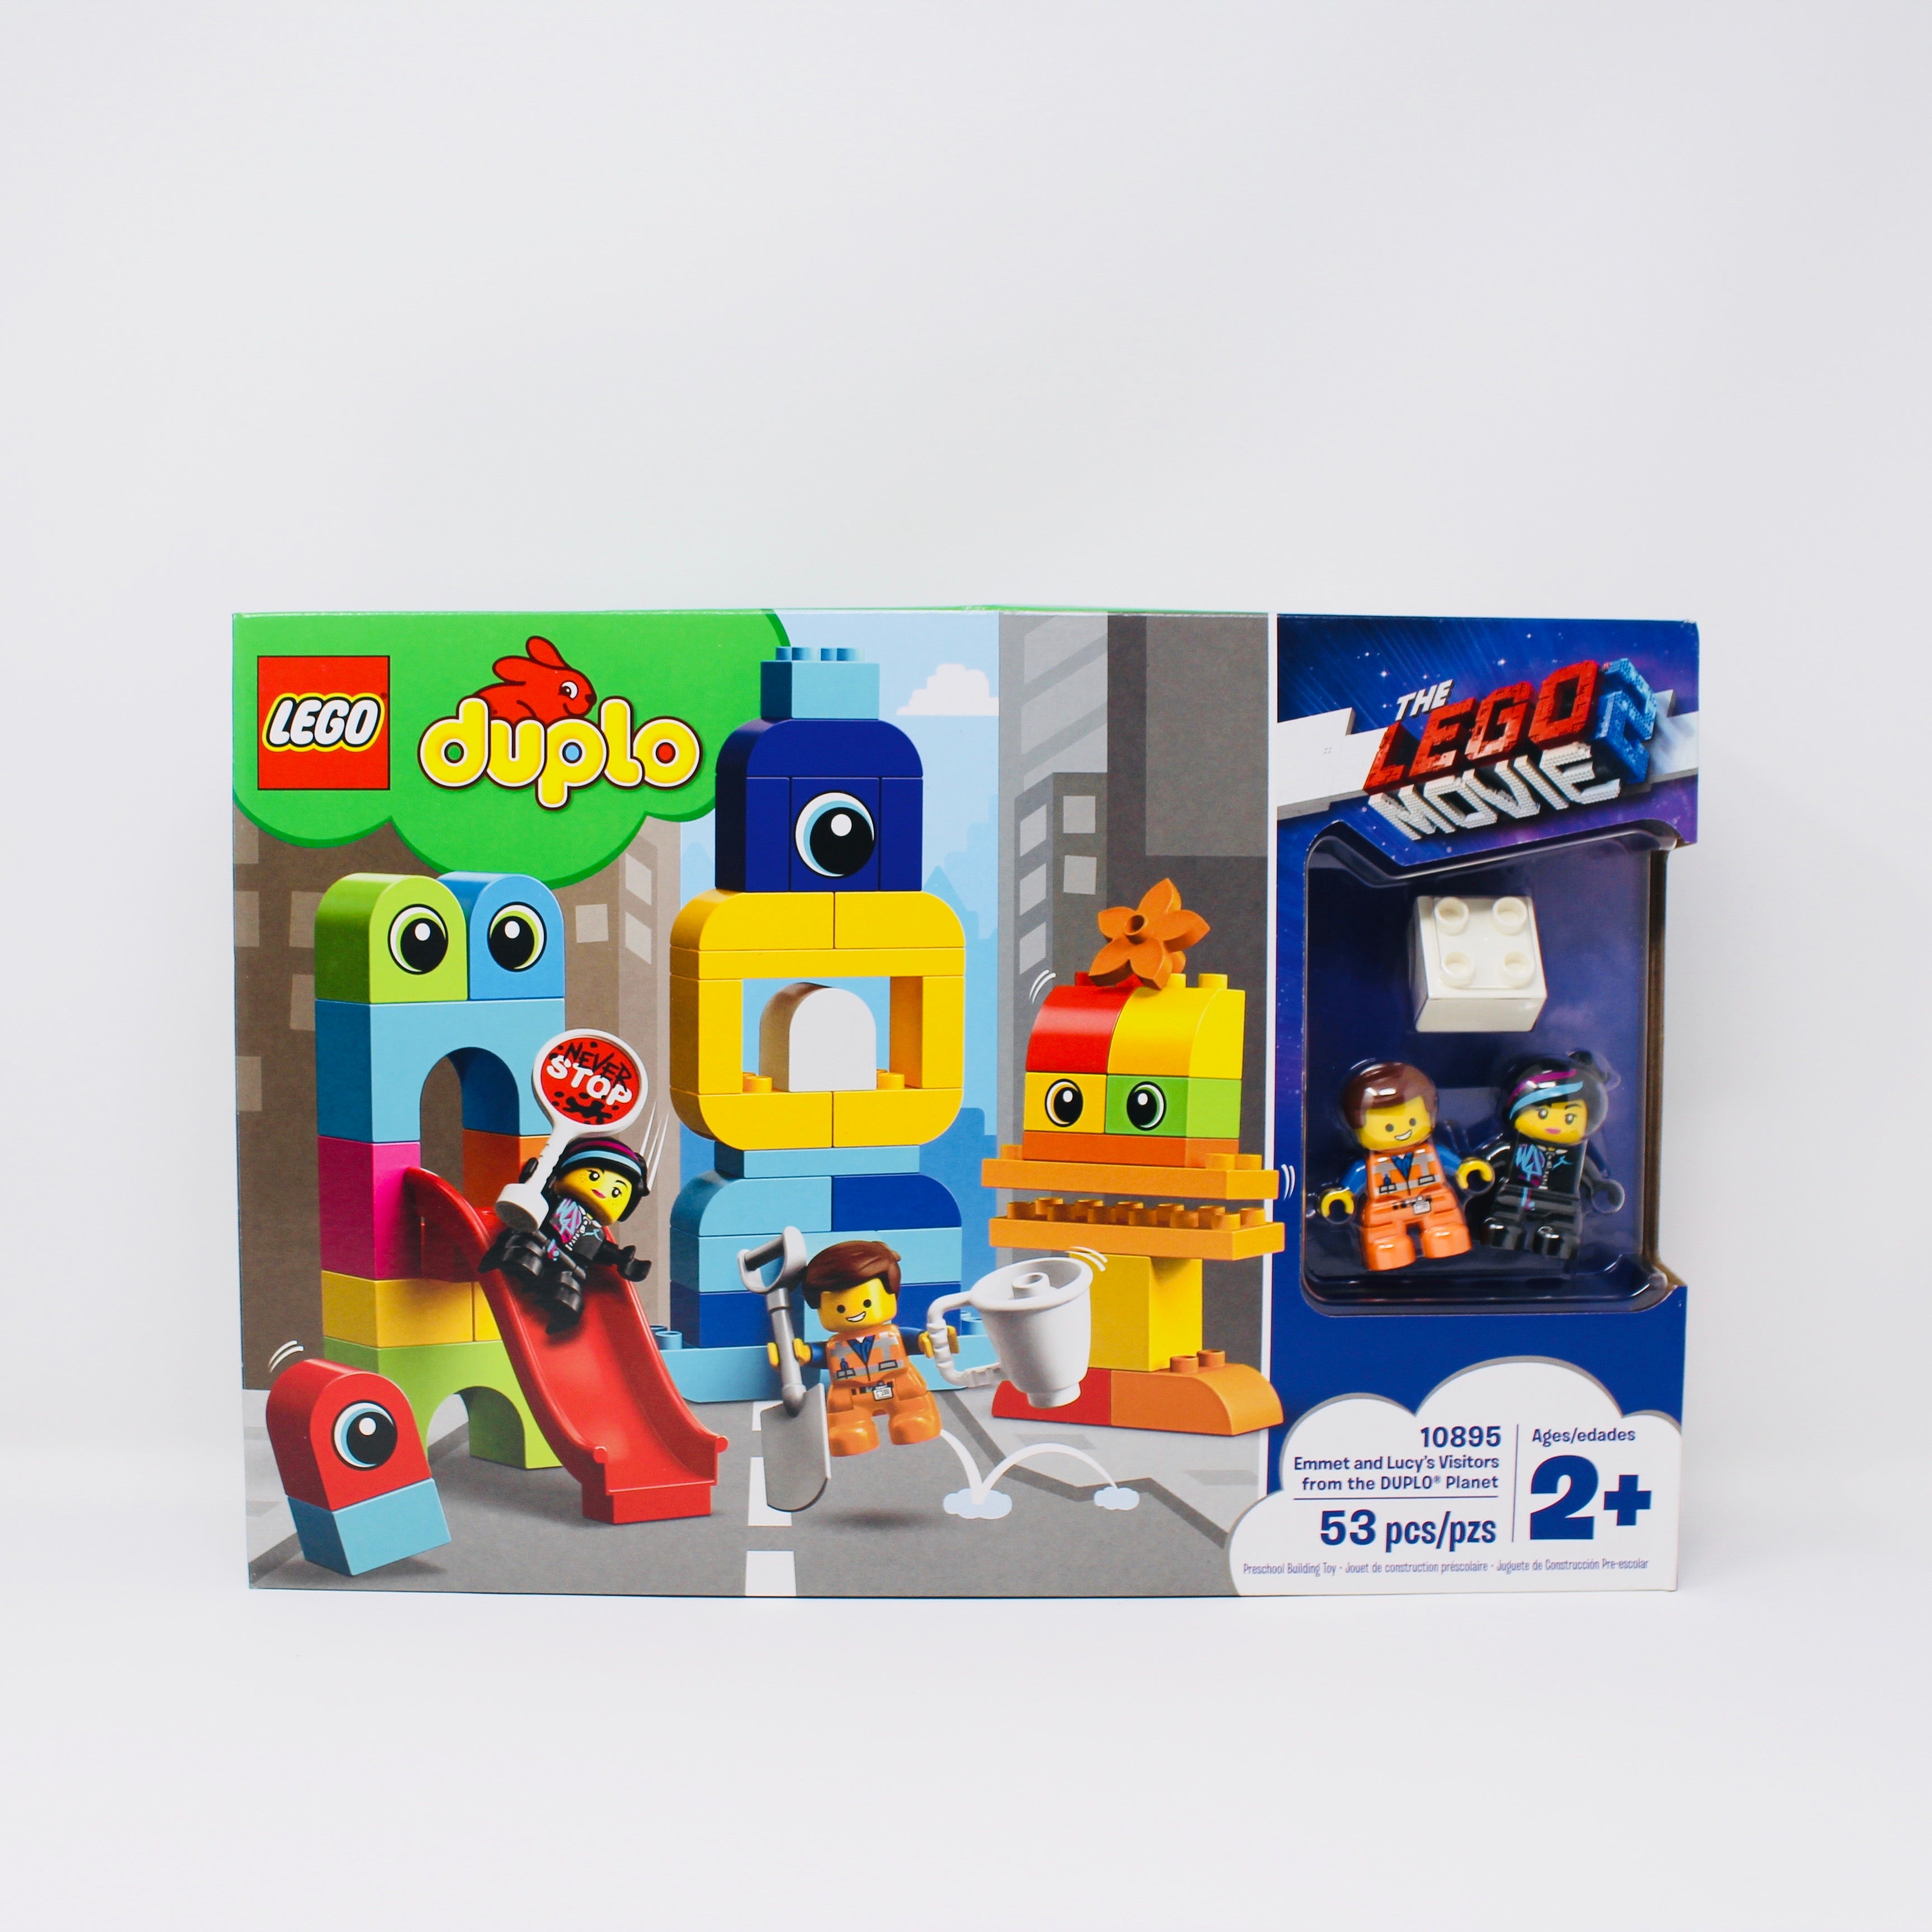 Retired Set 10895 LEGO Movie 2 Emmet and Lucys Visitors from the DUPLO Planet